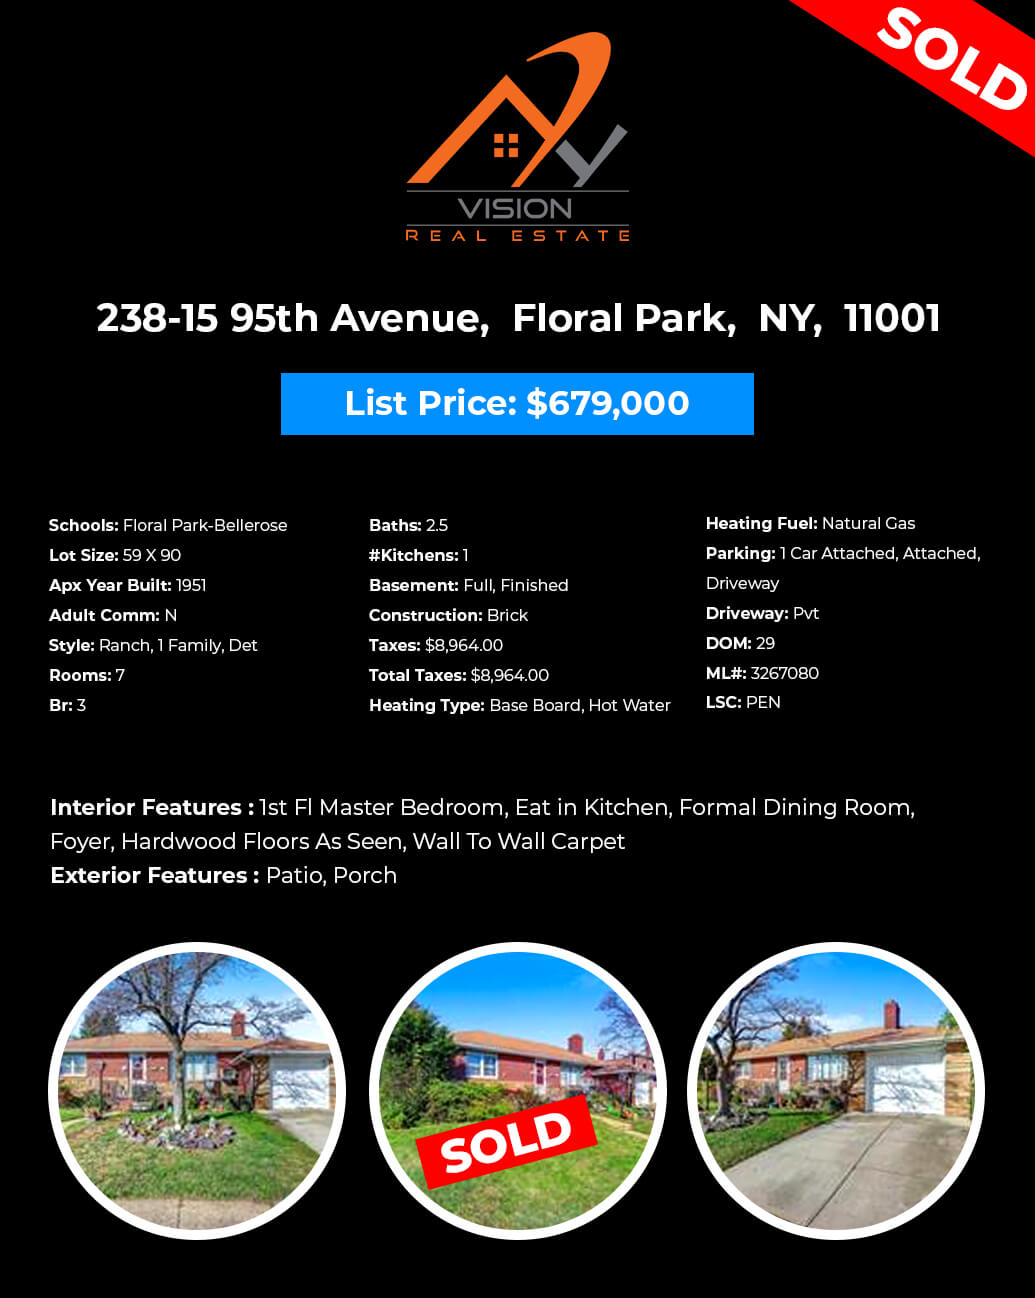 Home for Sale Floral Park, NY